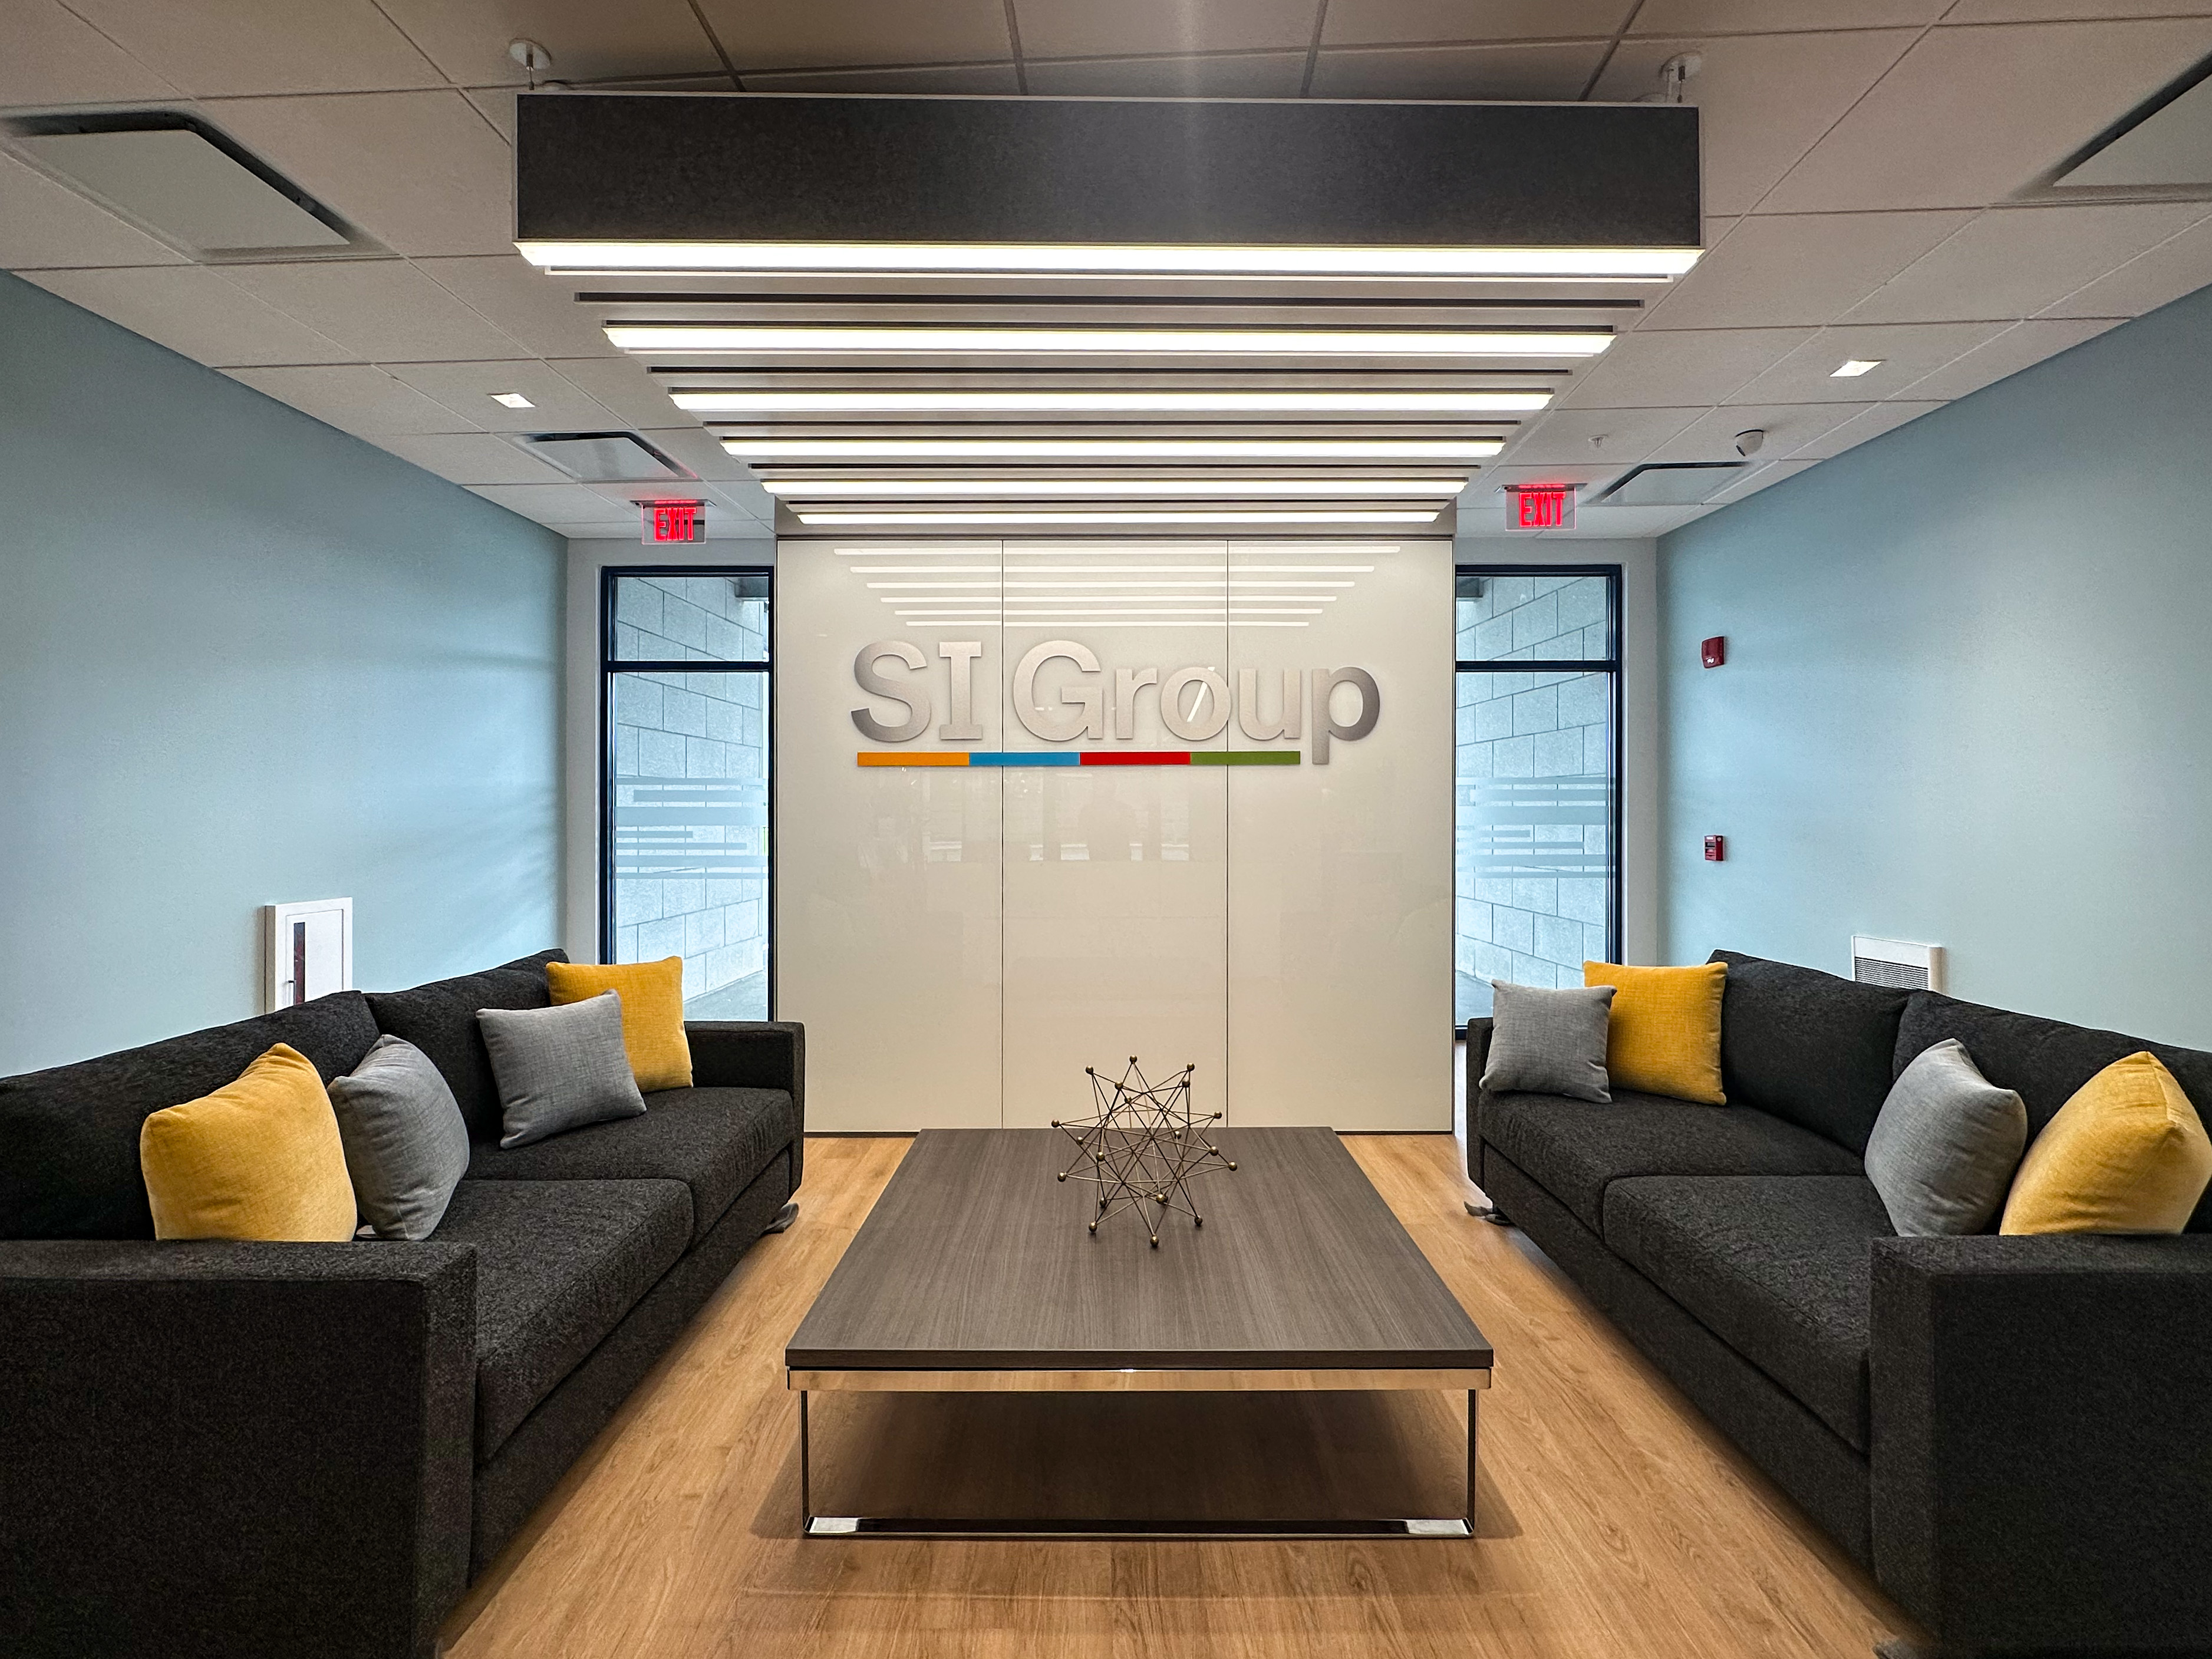 SI Group Debuts New Regional Office at Mohawk Harbor in Schenectady, N.Y. 